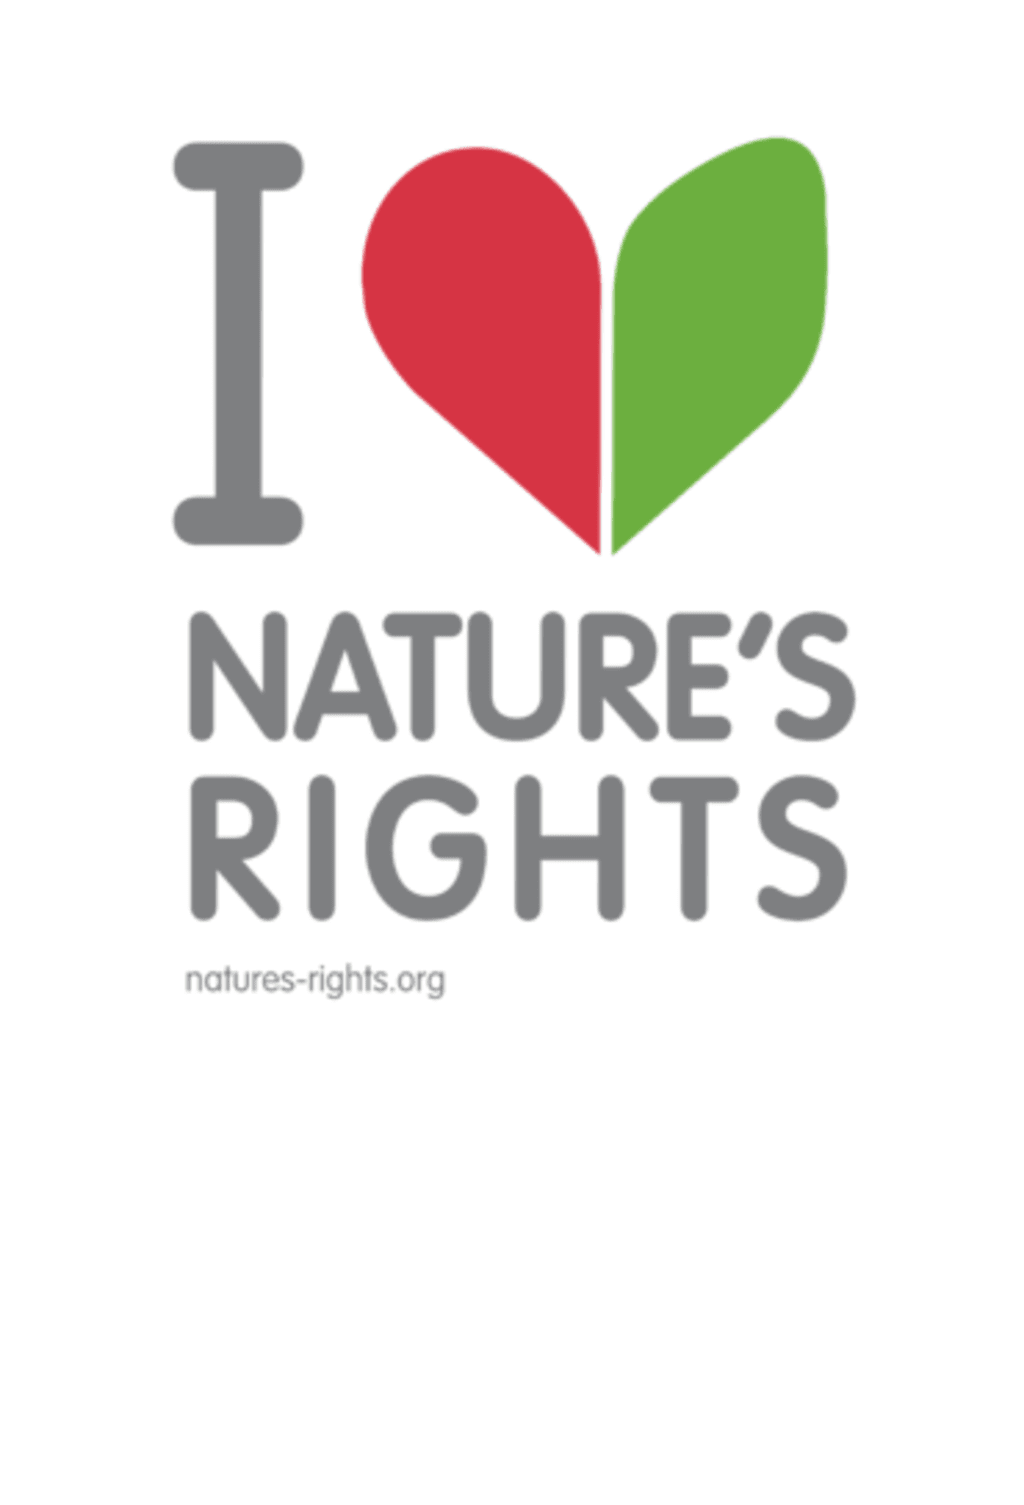 I Love Nature's Rights